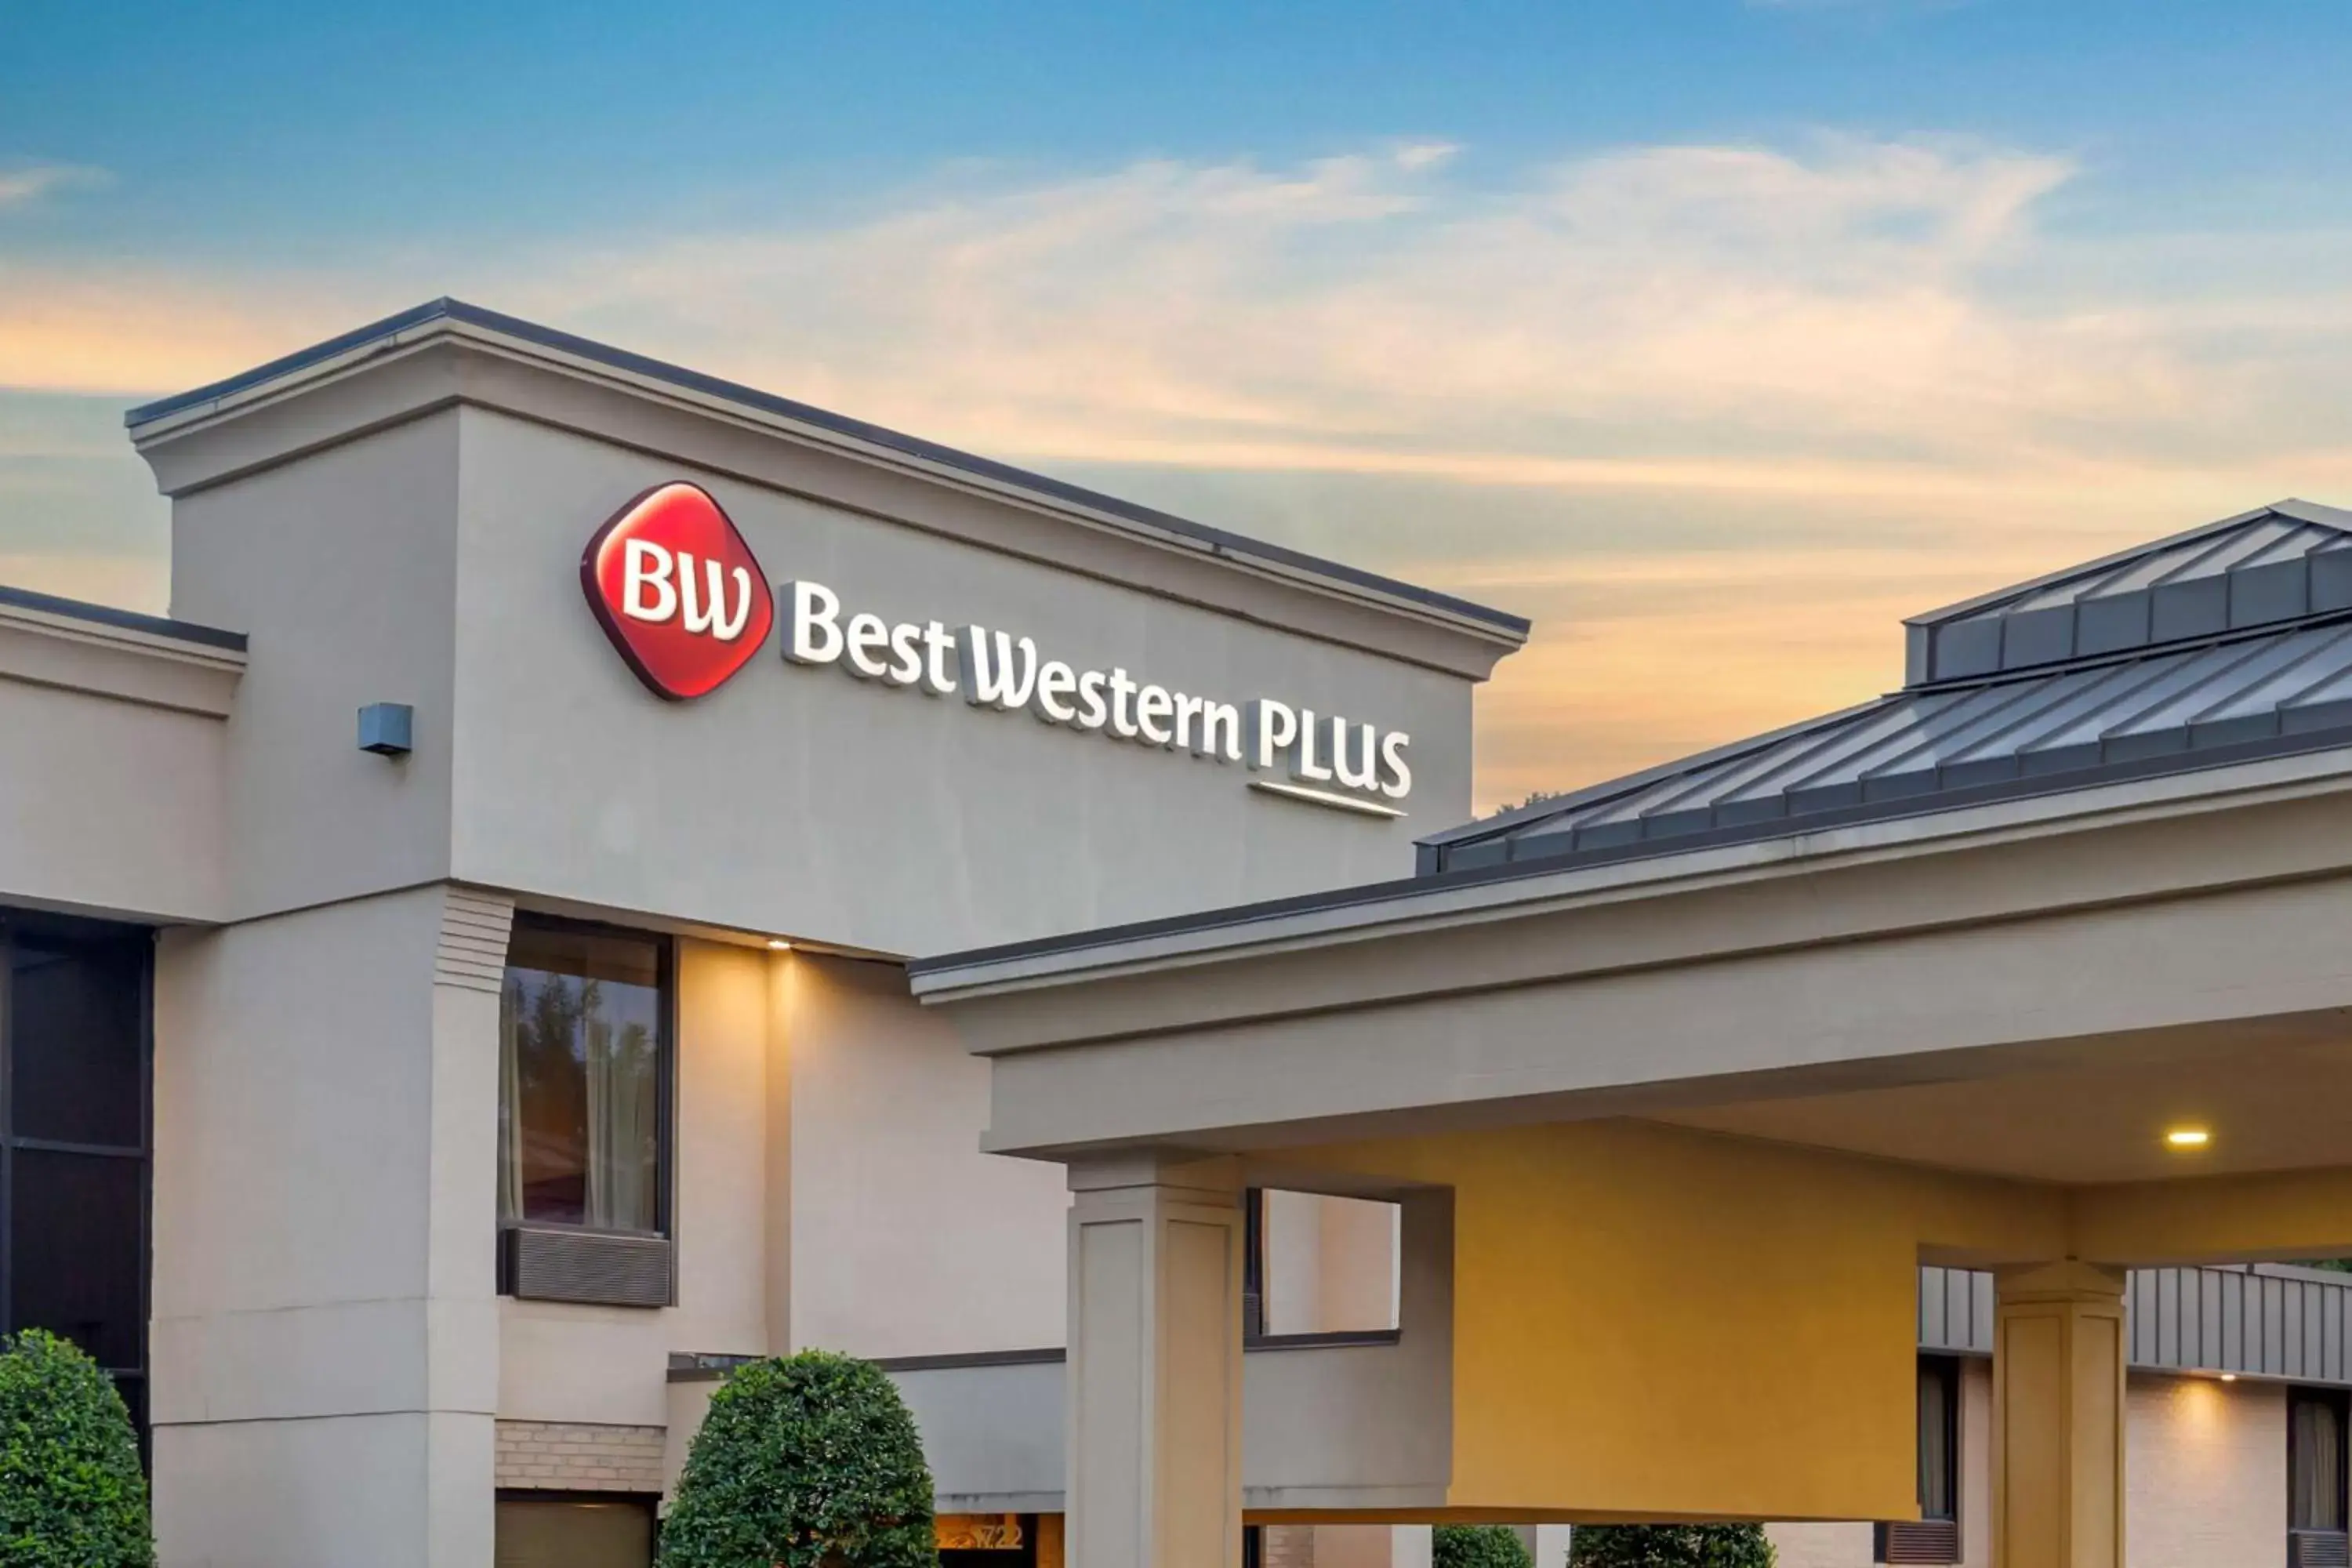 Property building in Best Western Plus Cary - NC State